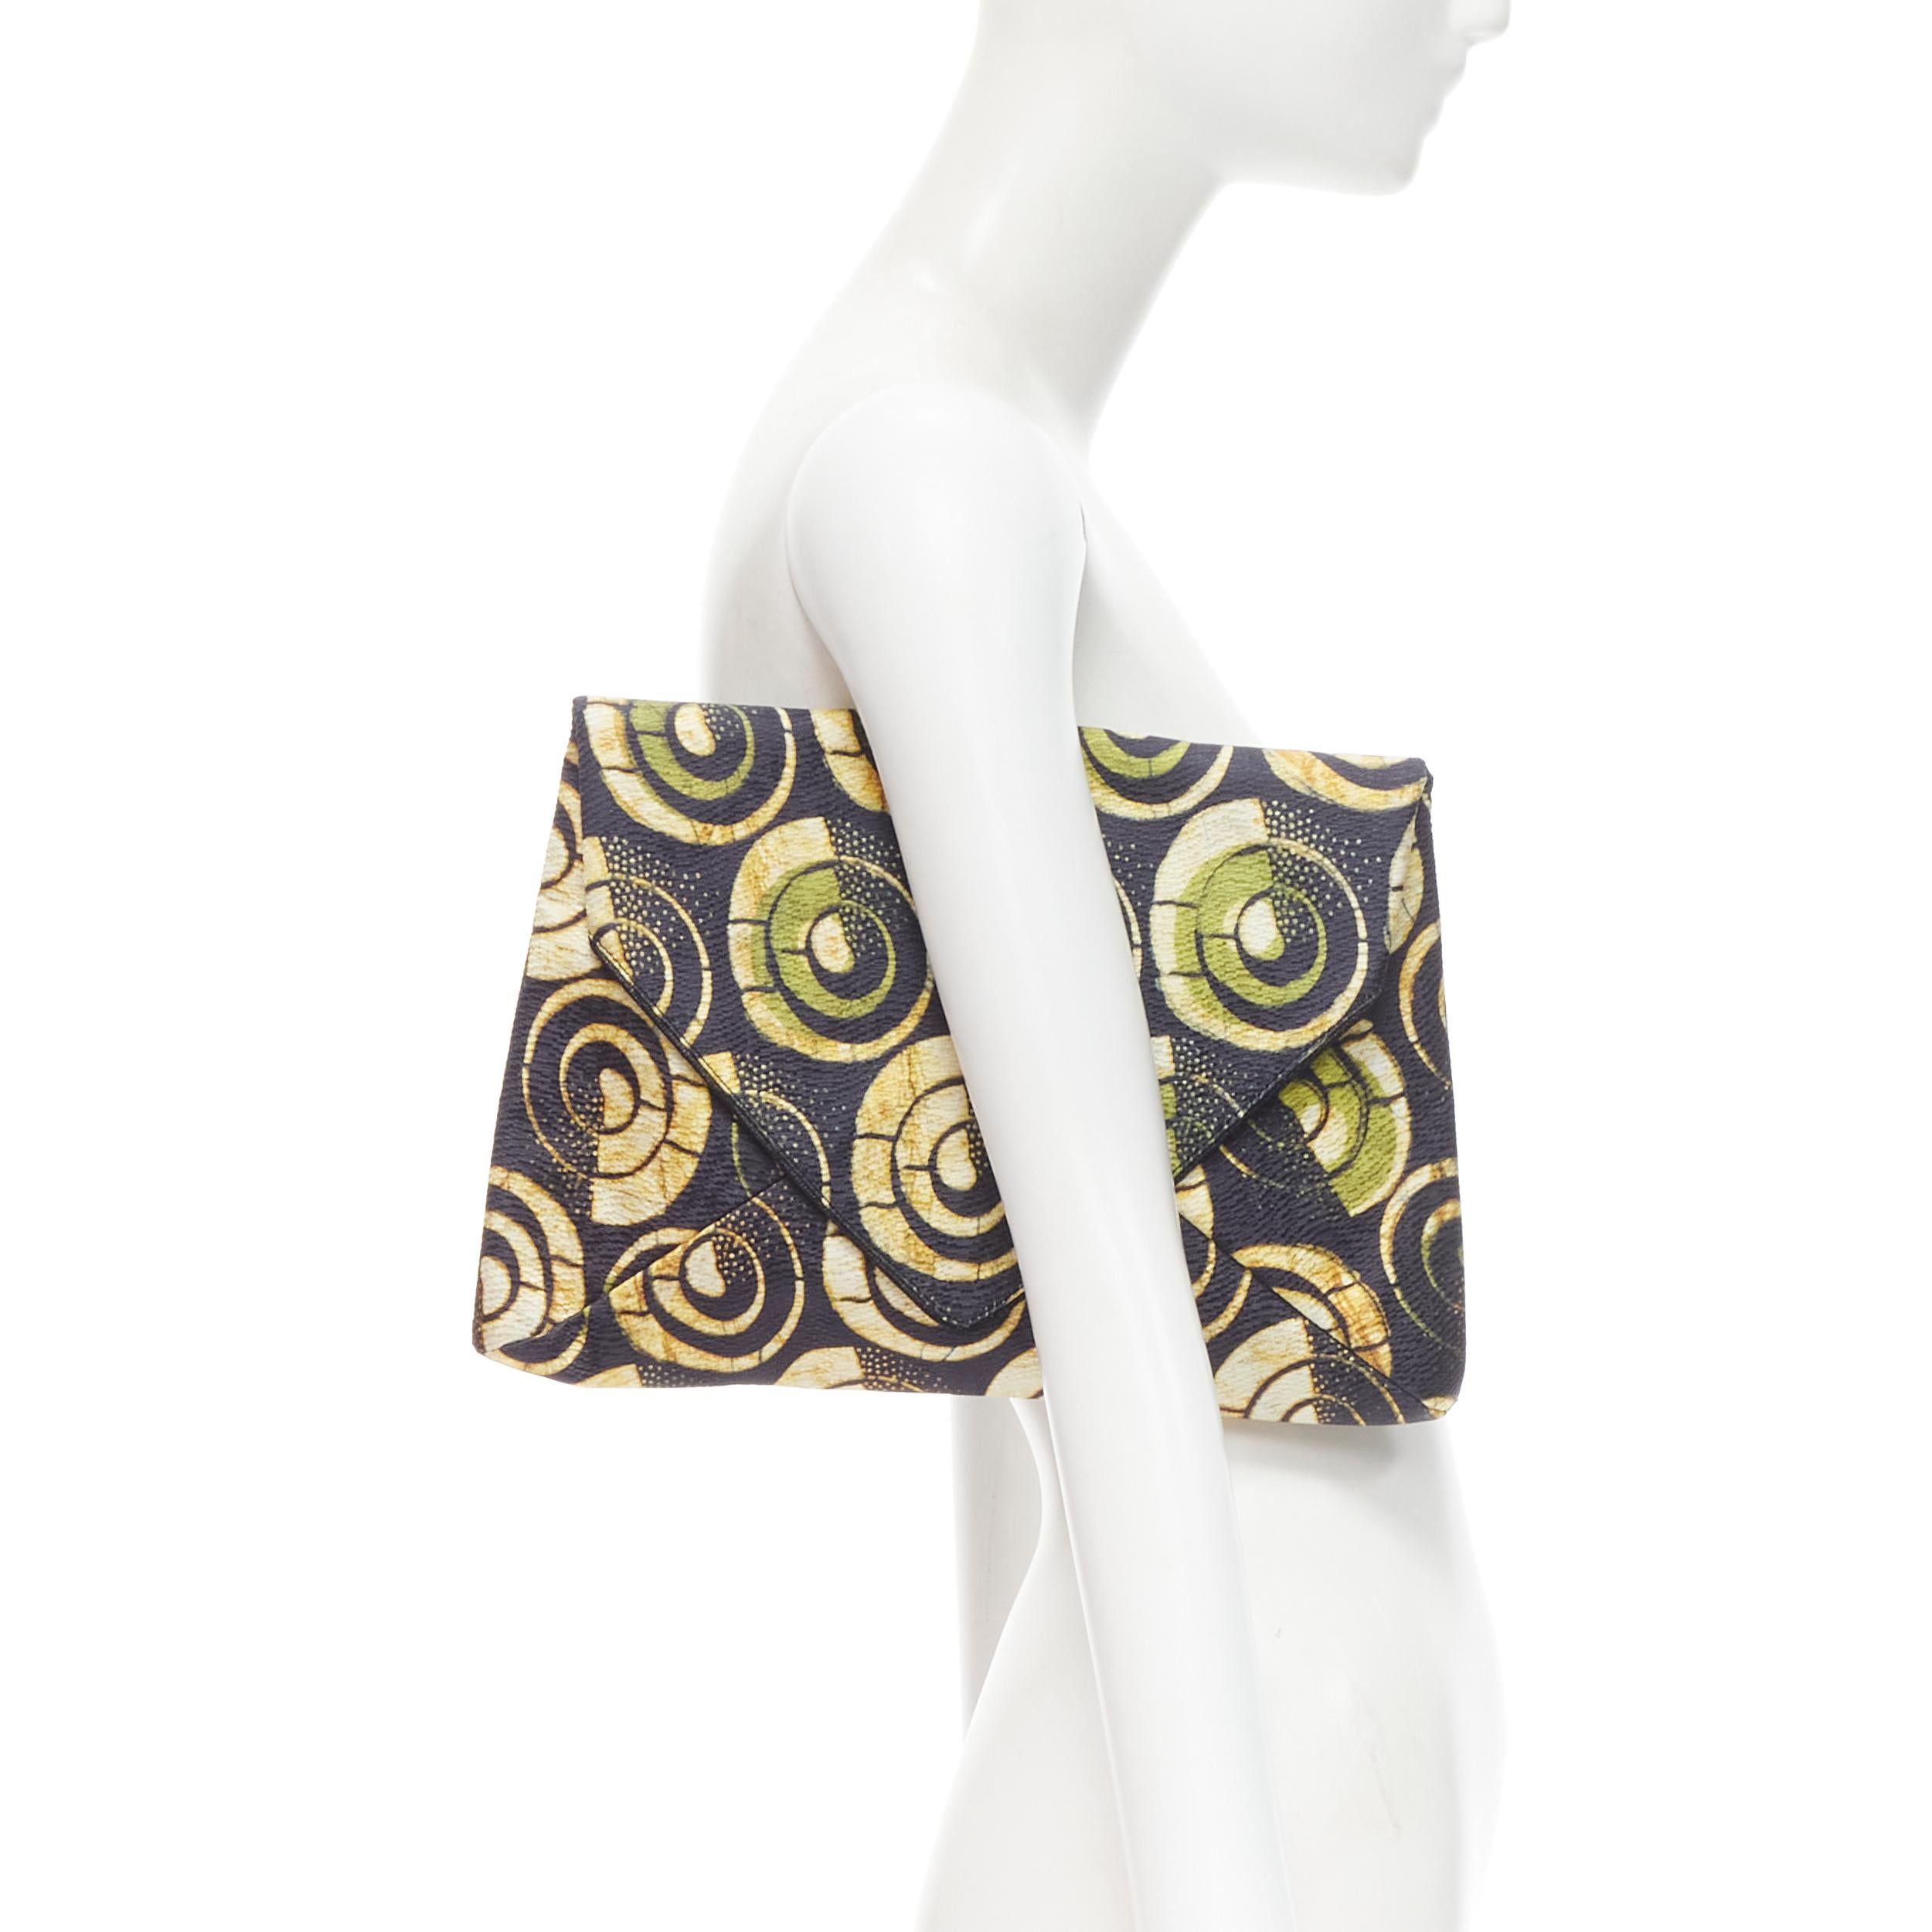 DRIES VAN NOTEN black yellow ethnic geometric swirl envelope clutch bag
Reference: CELG/A00047
Brand: Dries Van Noten
Designer: Dries Van Noten
Model: Ethnic print envelope clutch
Material: Fabric 
Color: Orange
Pattern: Abstract
Closure: Magnet